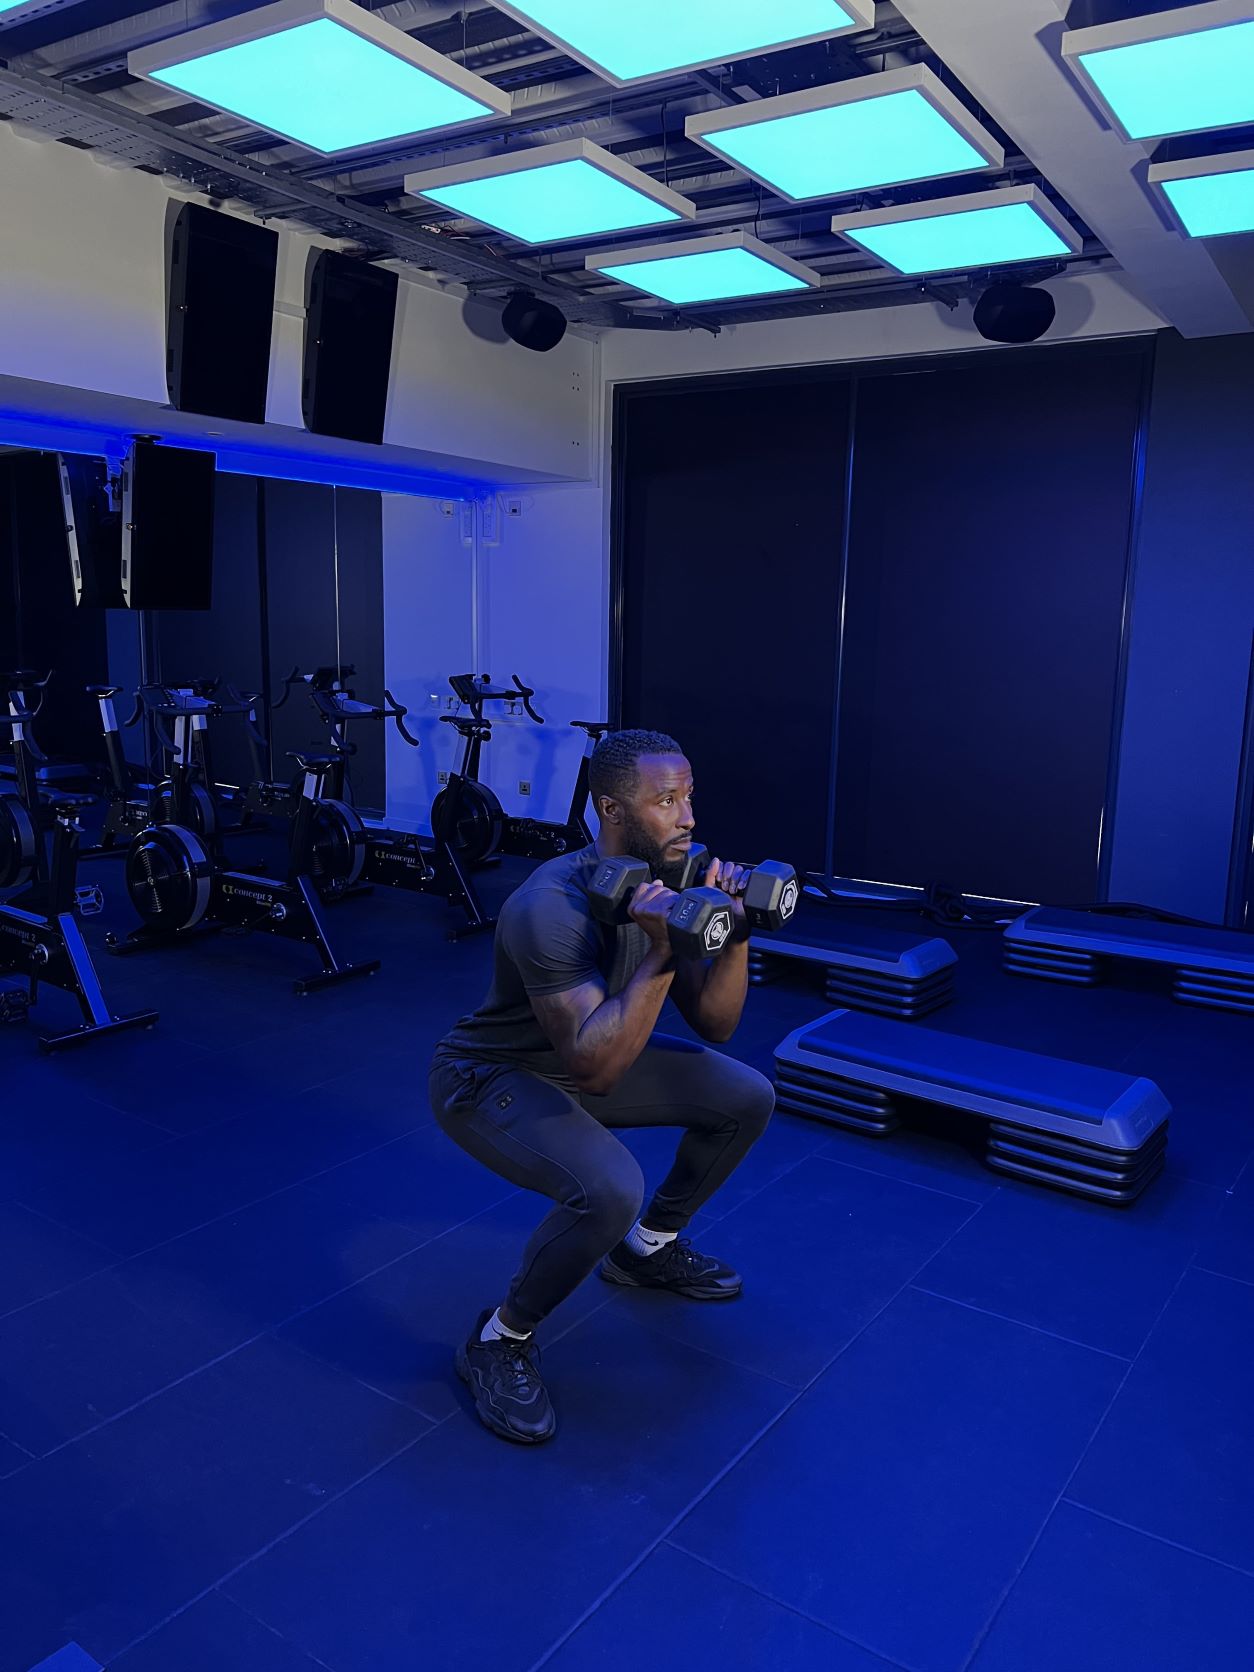 man demonstrates how to do a squat press at the gym; step 2, he squats low while holding a dumbbell in each hand at shoulder height